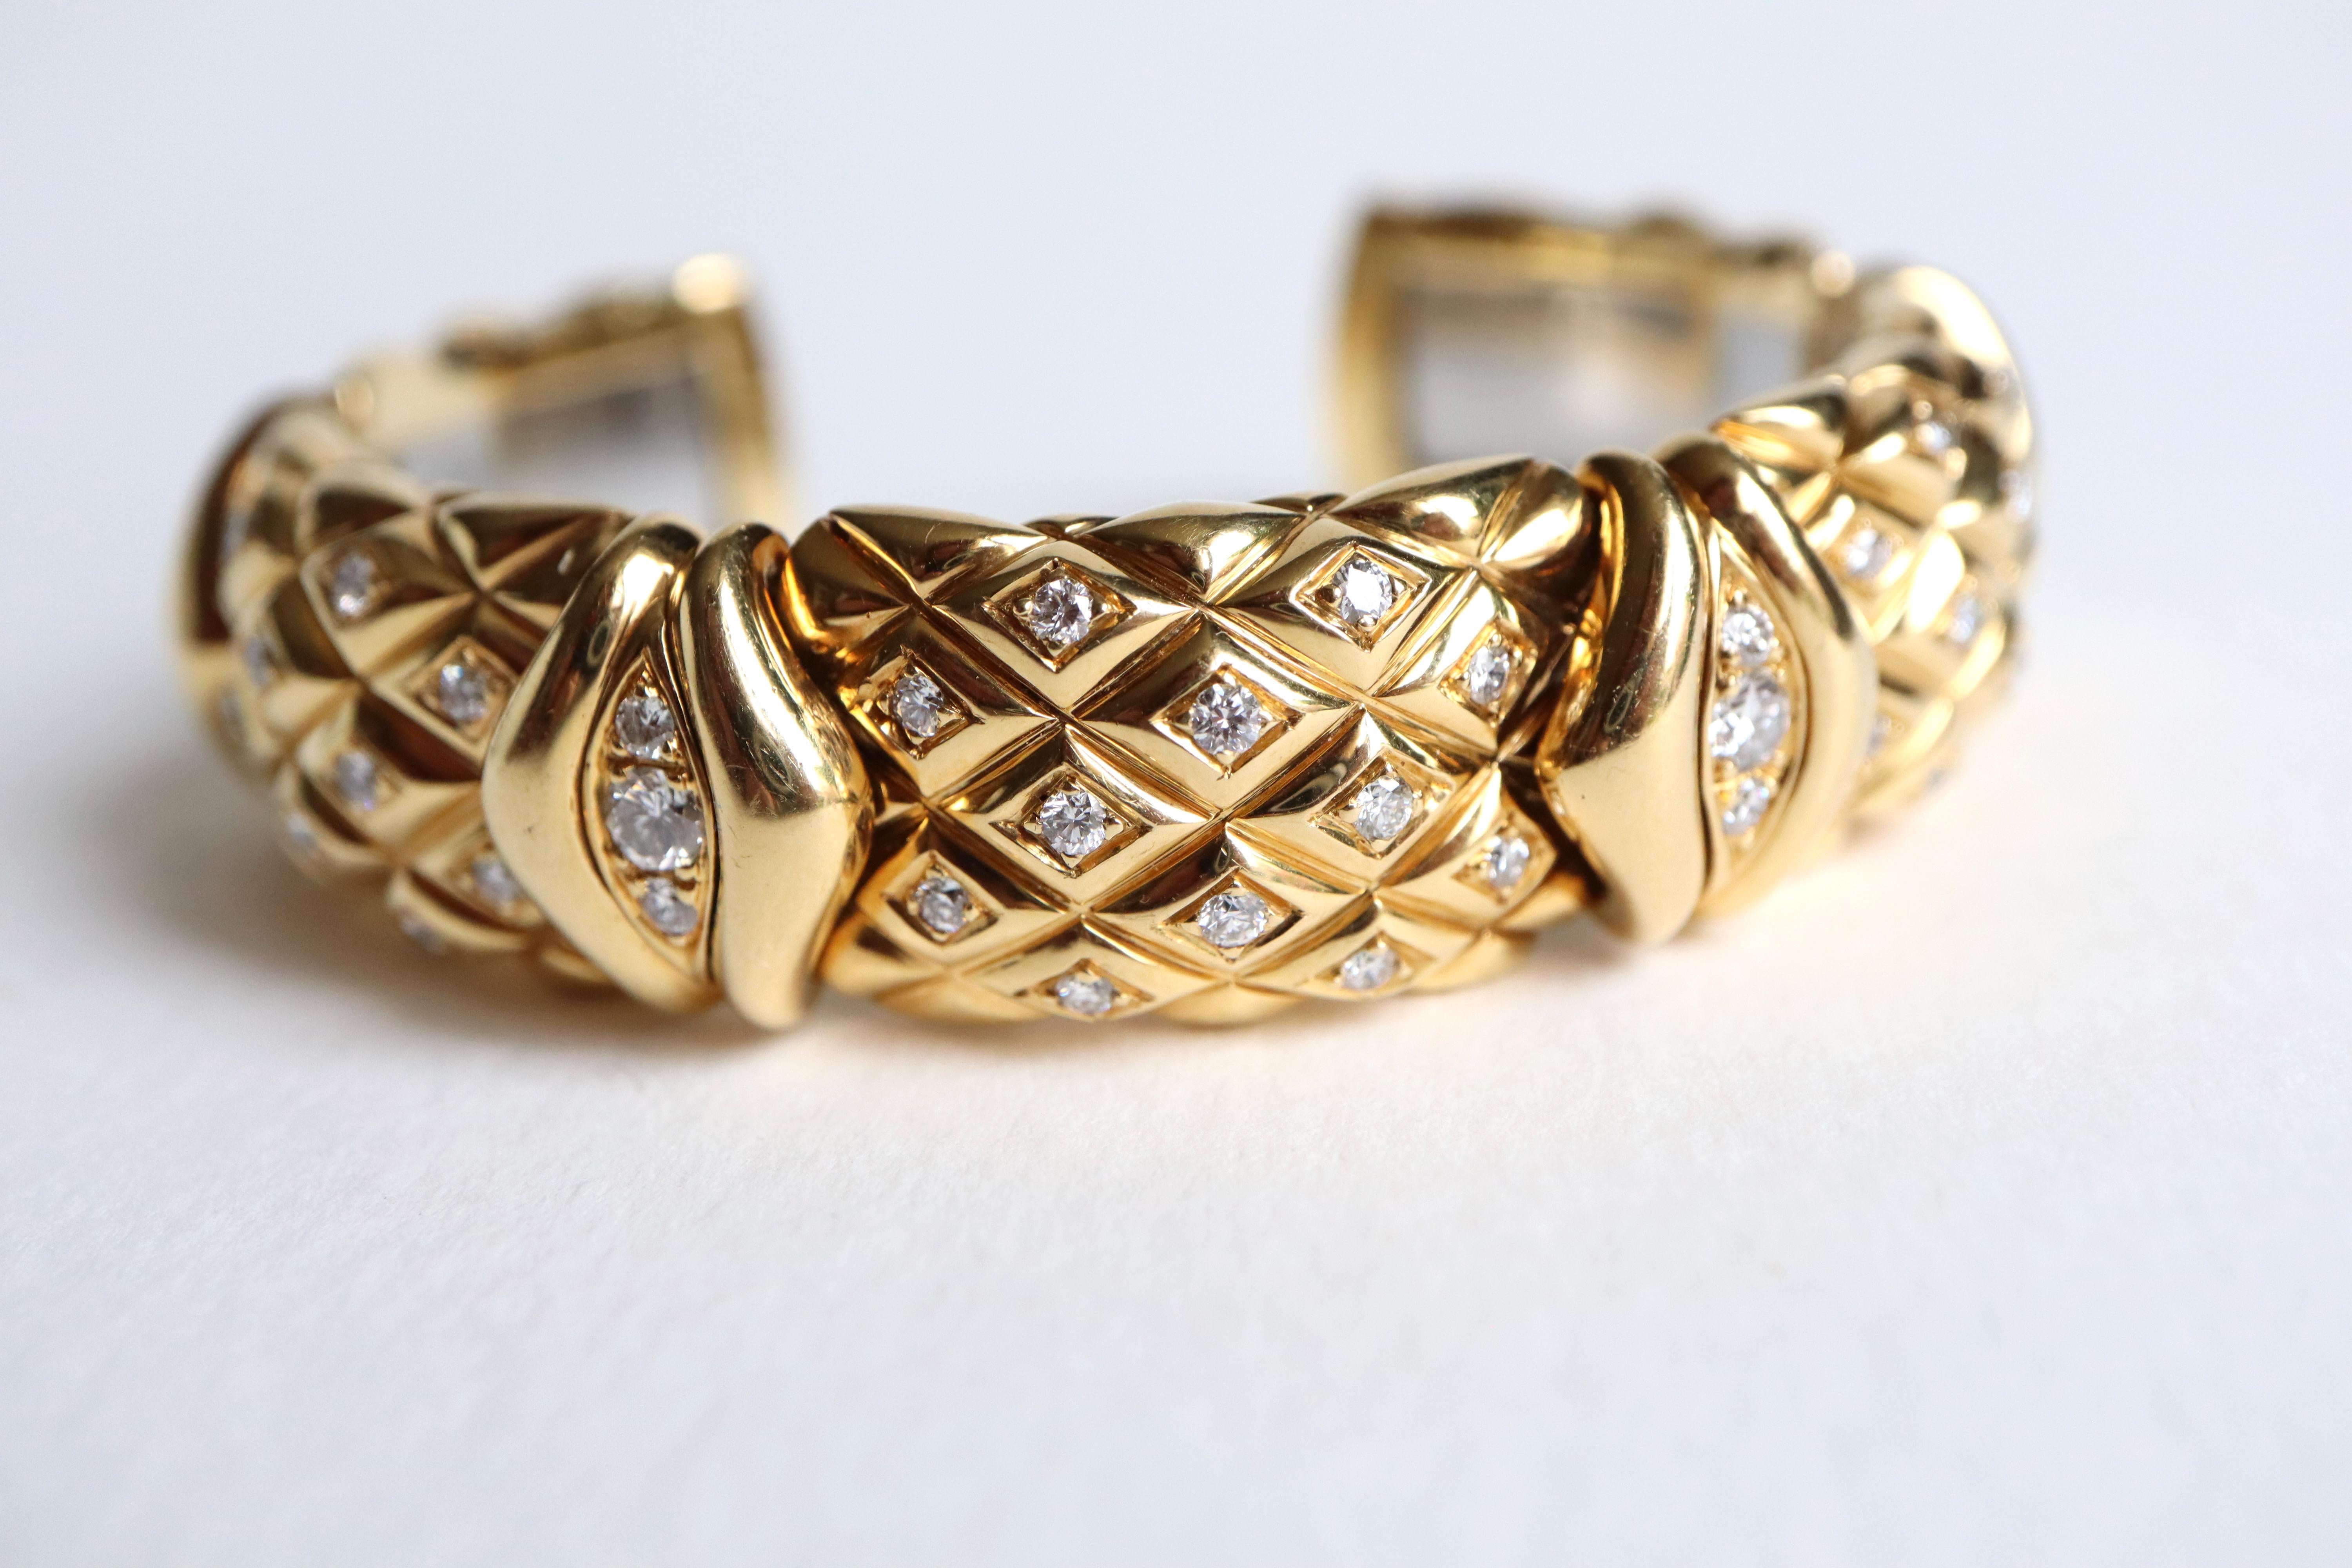 MAUBOUSSIN Semi-rigid Bracelet in 18 kt yellow Gold and Diamonds
Semi-rigid MAUBOUSSIN Bracelet in quilted 18 kt yellow Gold set with Diamonds for approximately 2 carats, inner steel core.
Signed and Numbered
Gross Weight: 64.9 g 
Interior